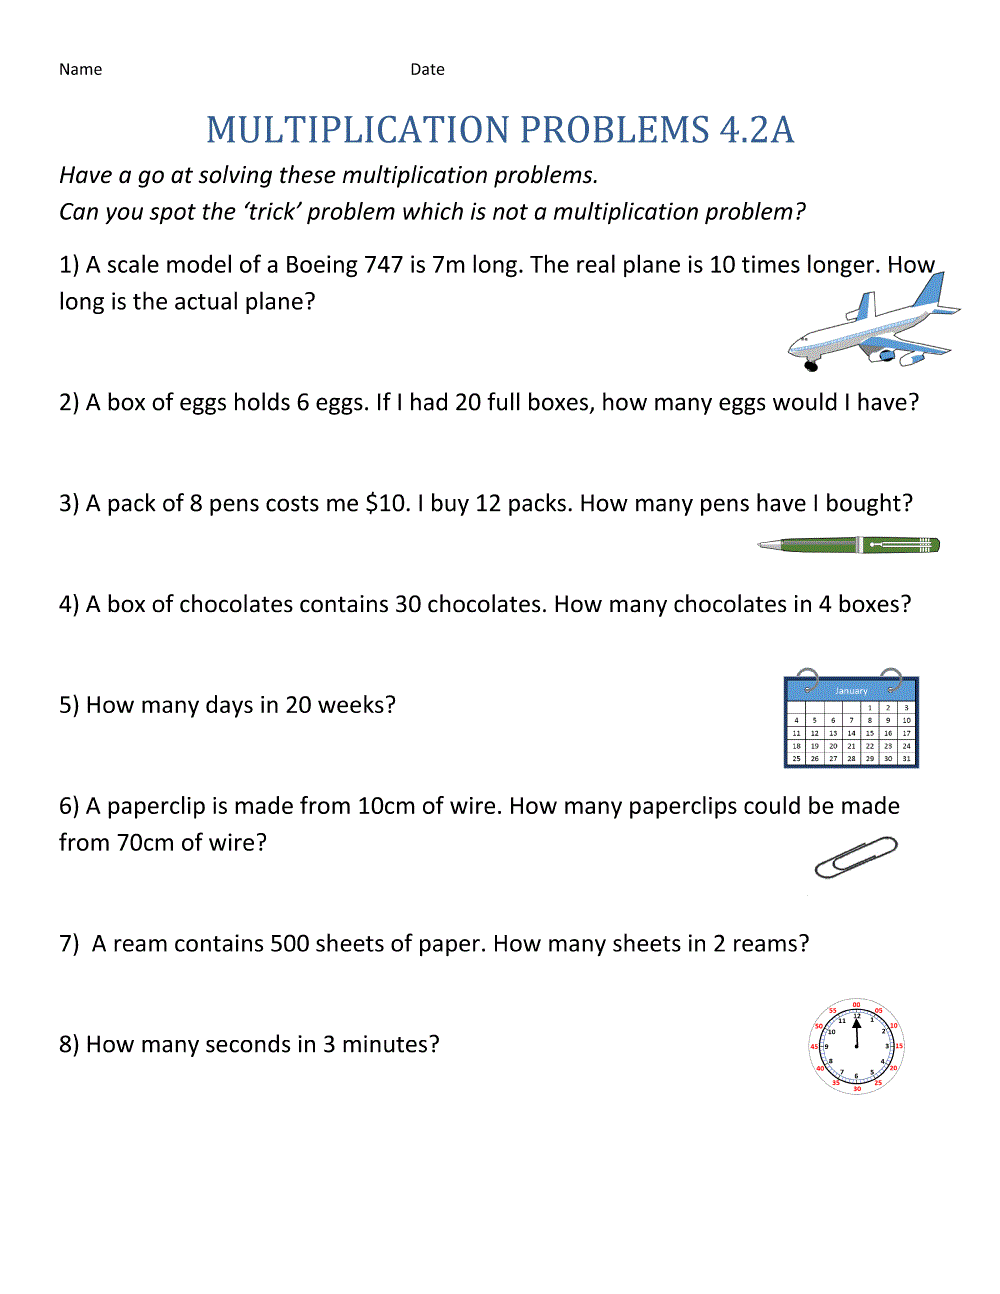 Word Problems Worksheets 4th Grade